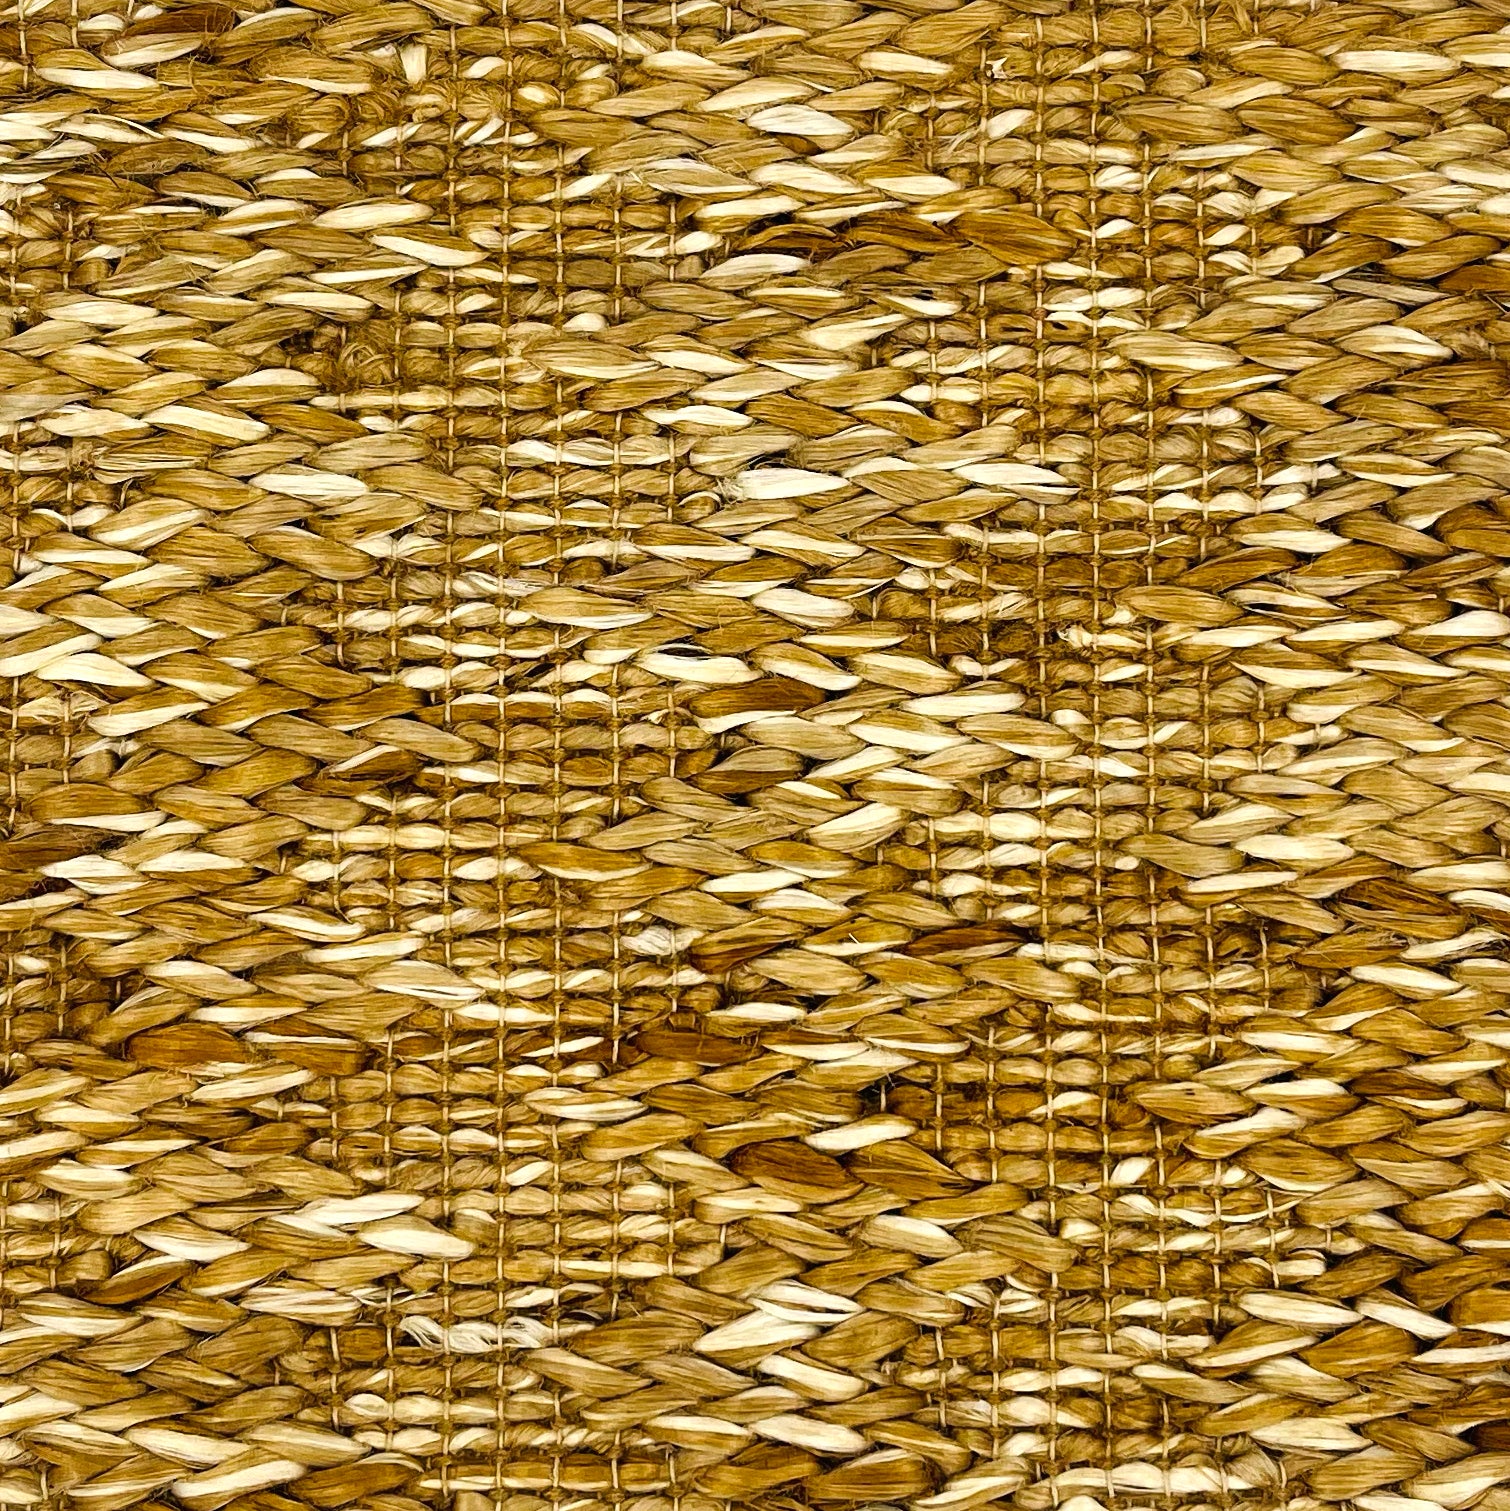 Woven rug swatch in natural fibers in a subtle striated stripe pattern